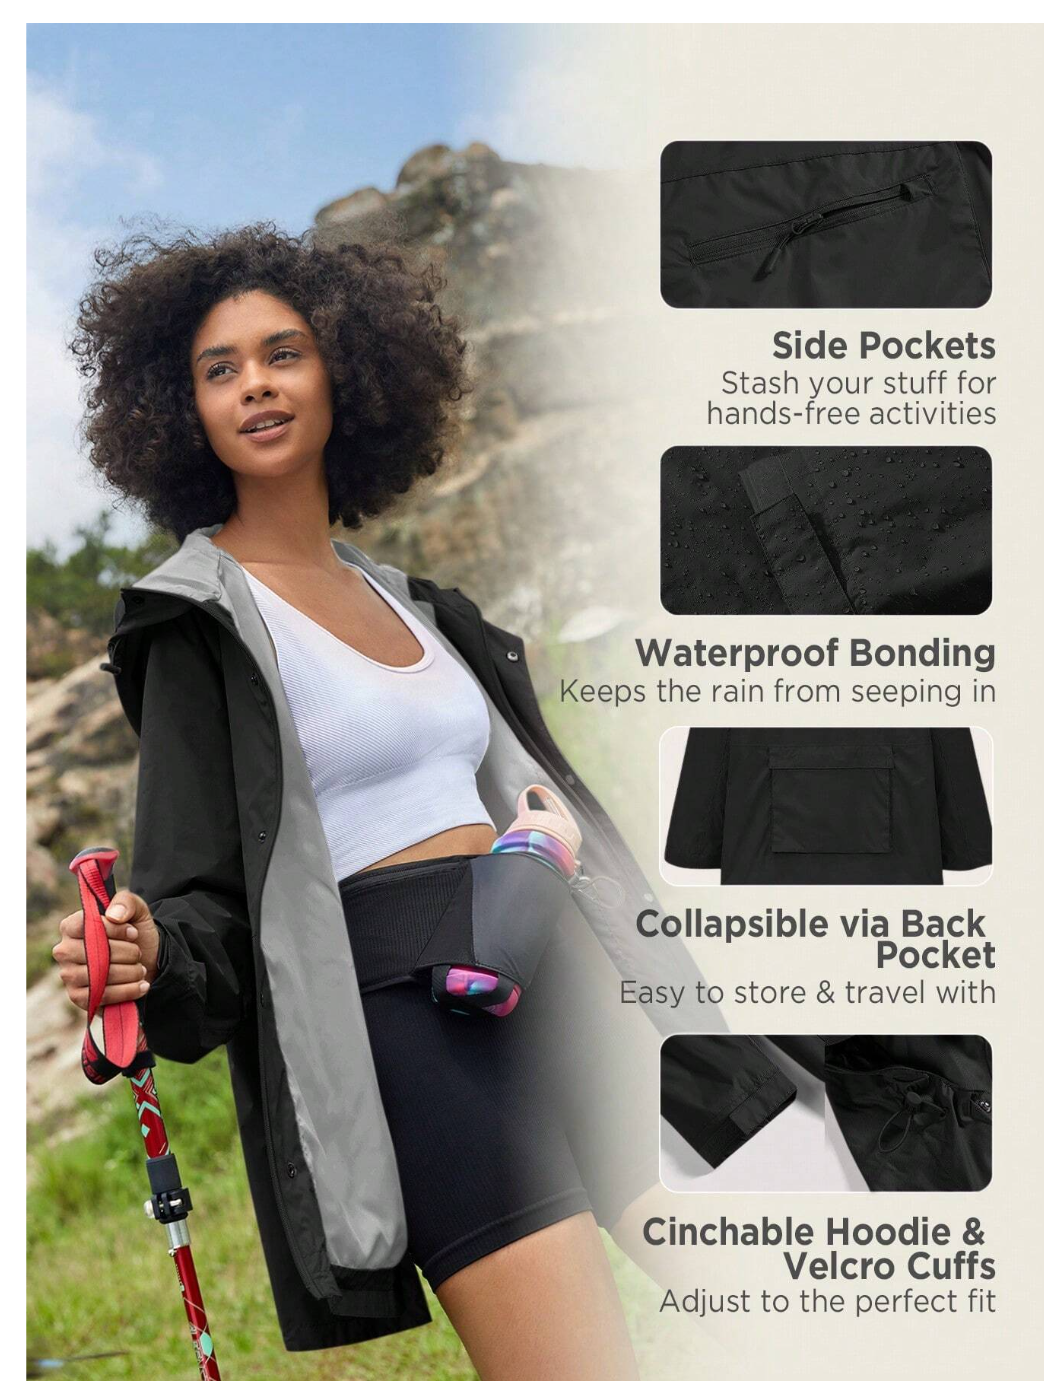 Embrace the Elements in Style: My Nature Women's Hooded Waterproof Windbreaker for Hiking, Sports, and Urban Adventures!